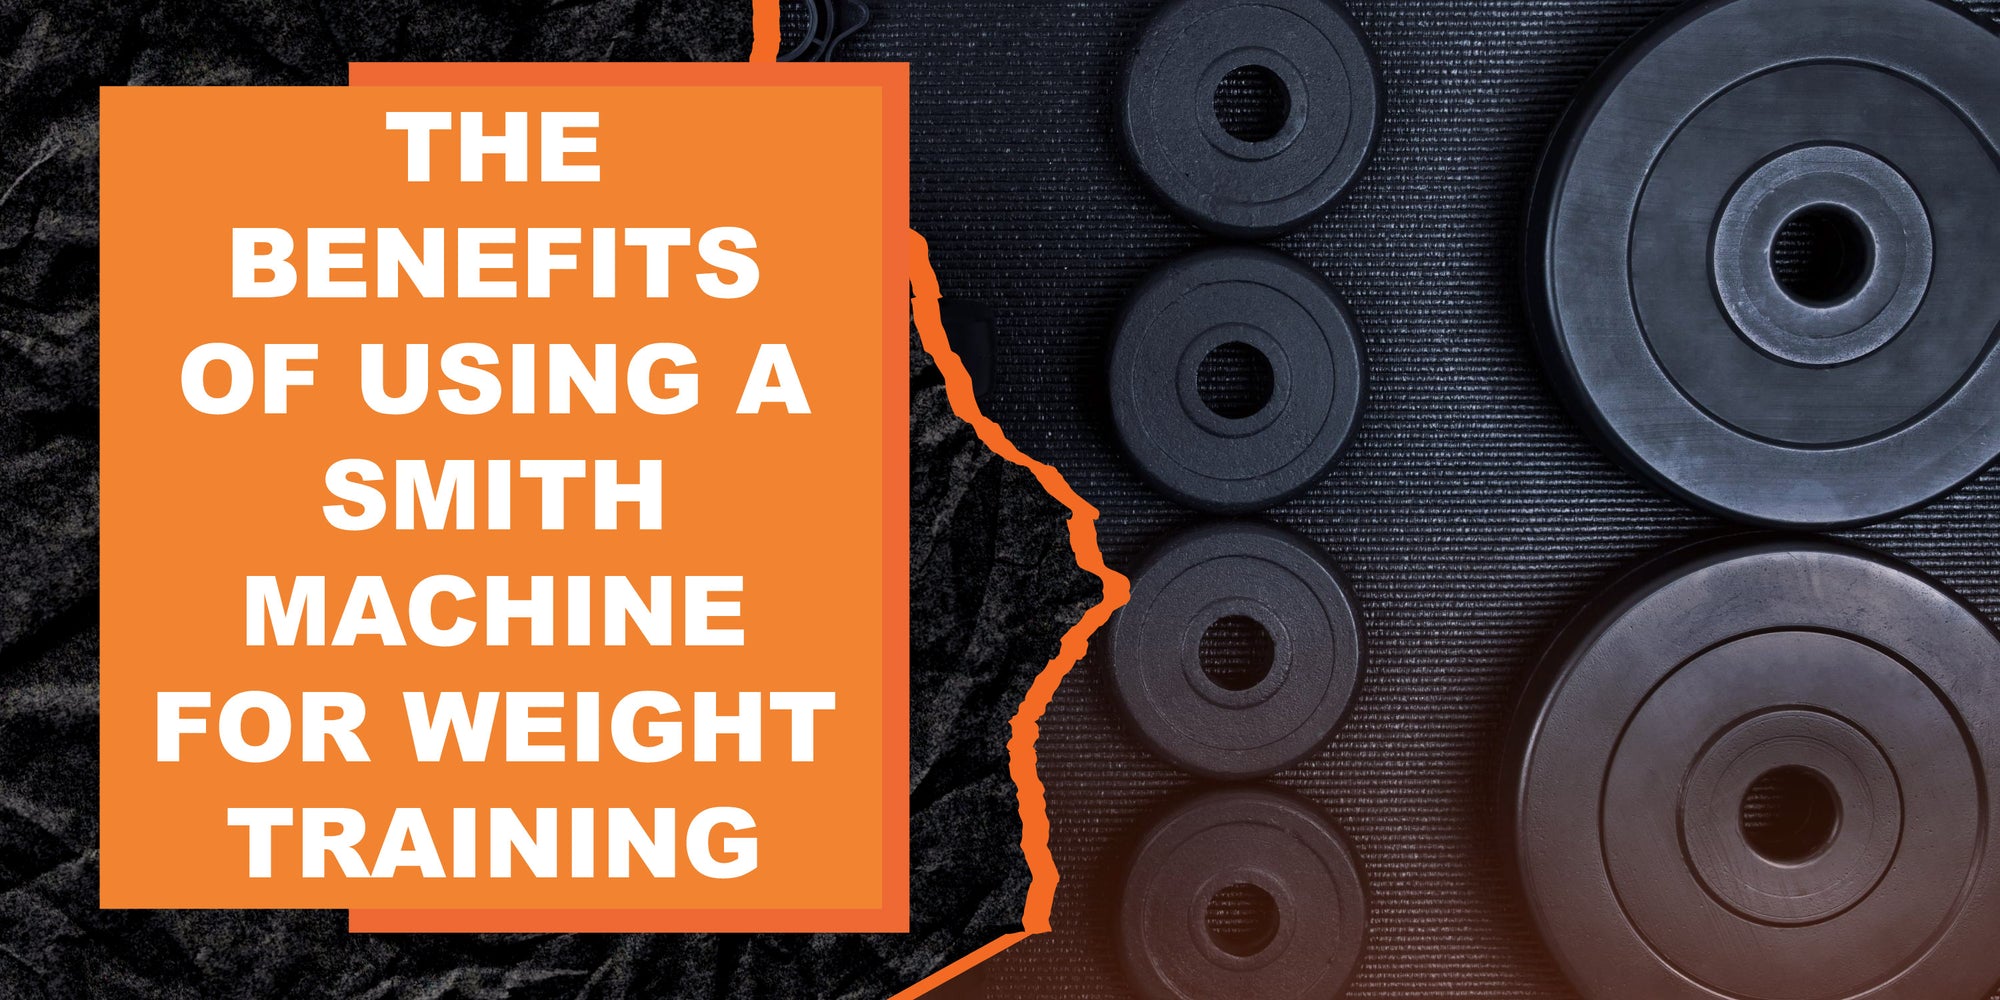 The Benefits of Using a Smith Machine for Weight Training